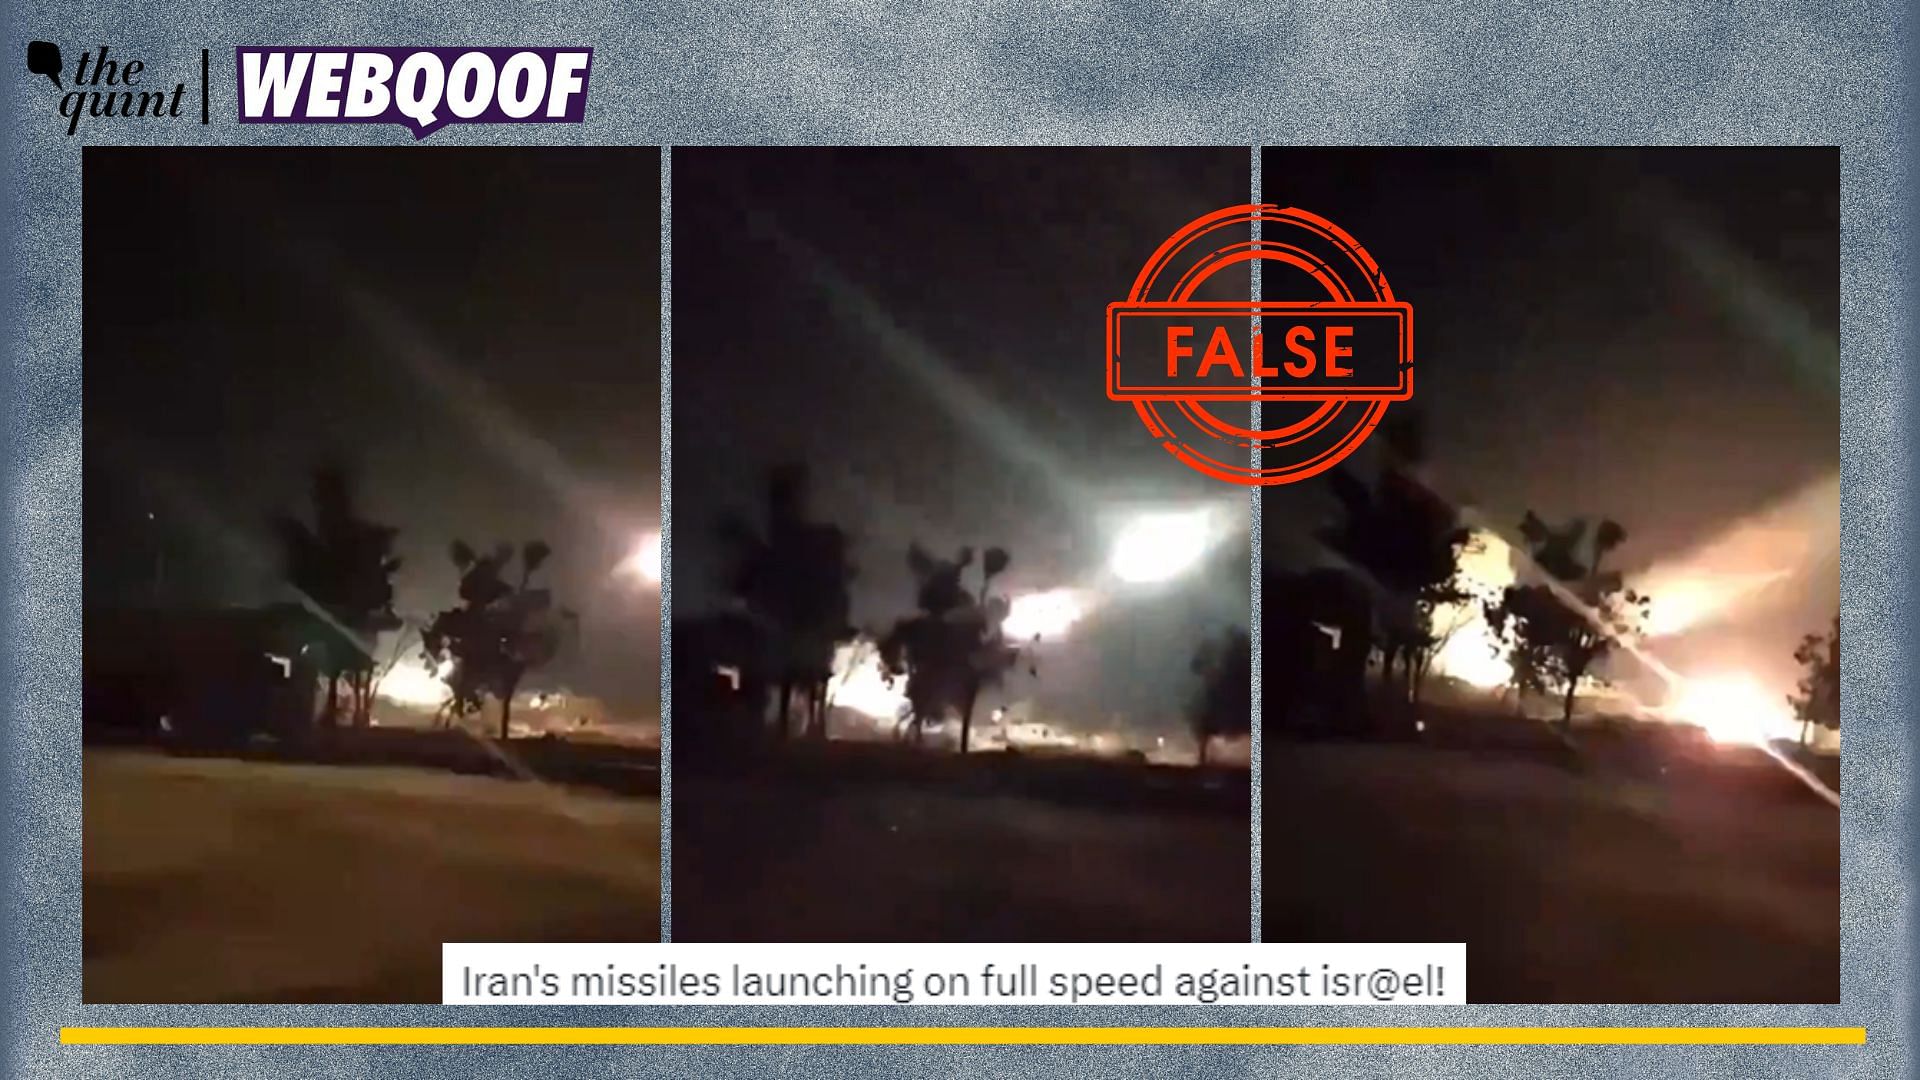 Old, Unrelated Video Peddled as Iran Launching Missiles Against Israel